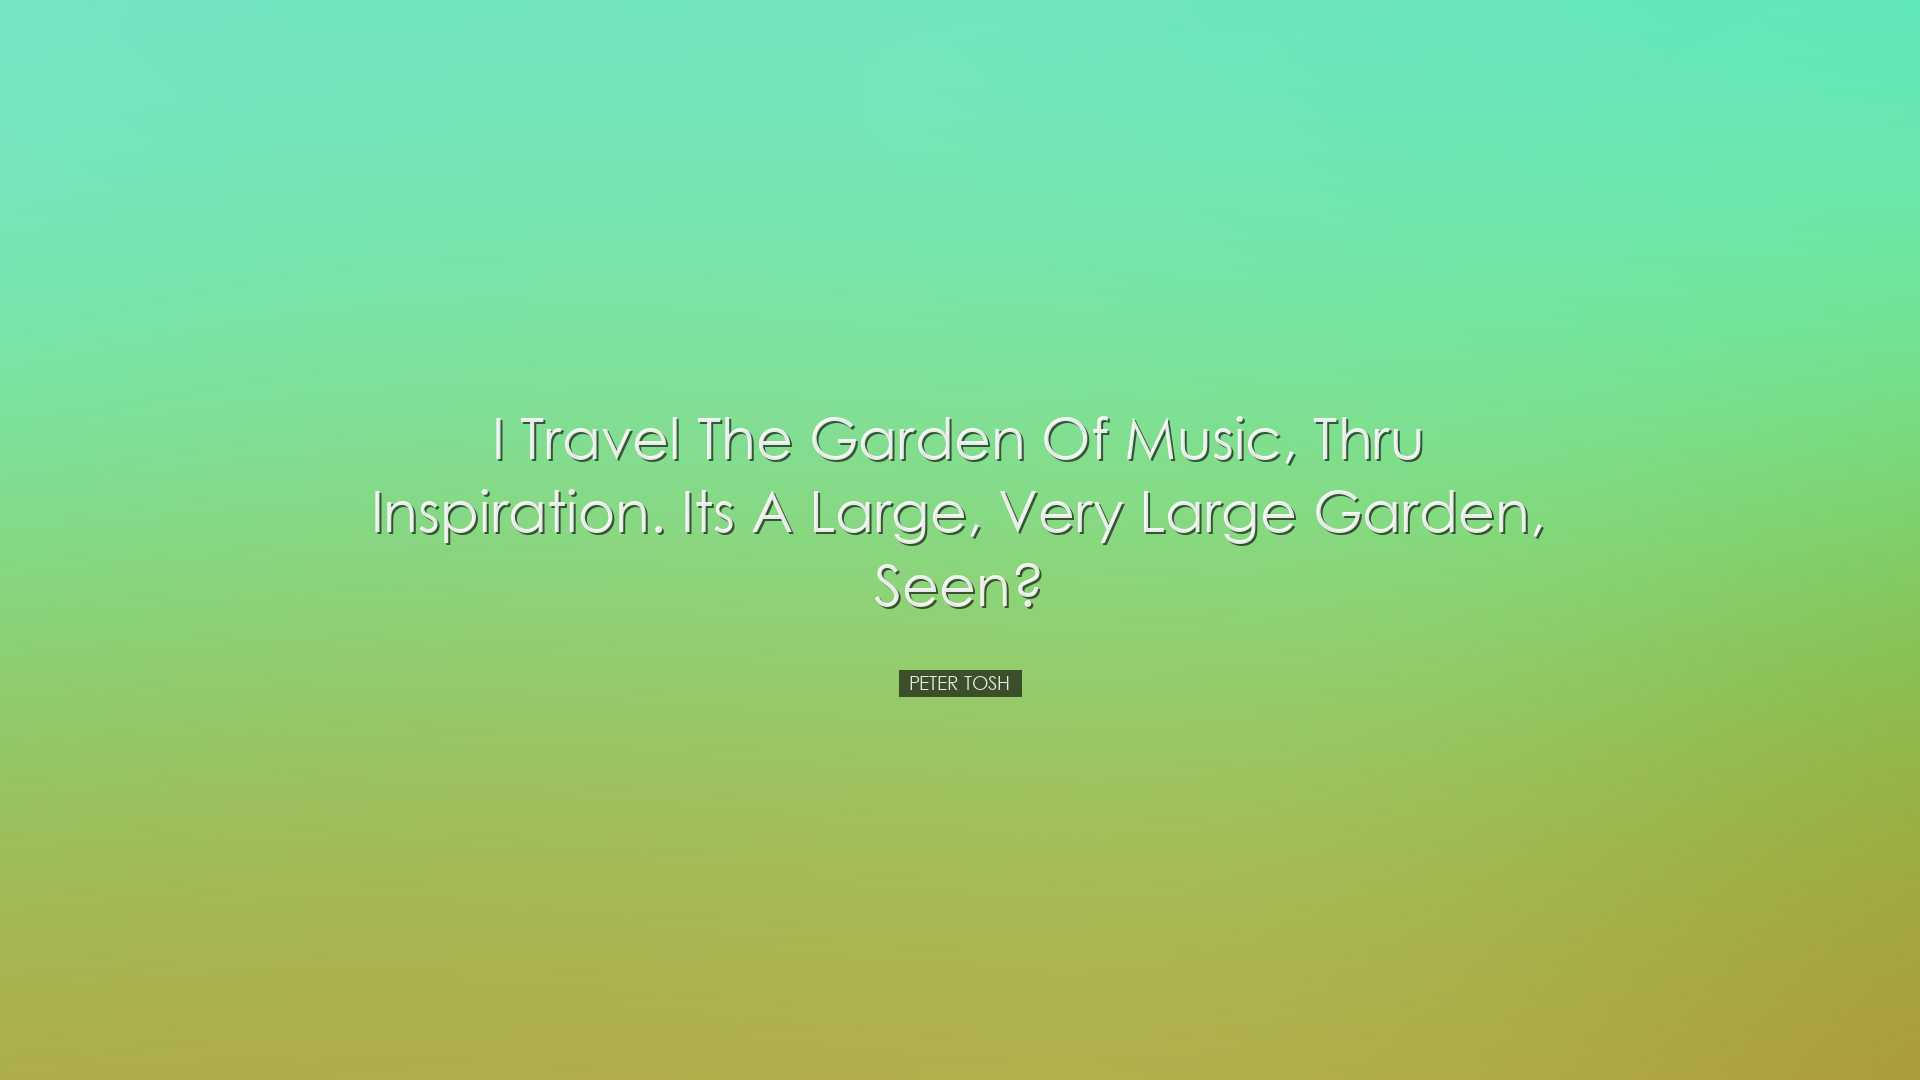 I travel the garden of music, thru inspiration. Its a large, very